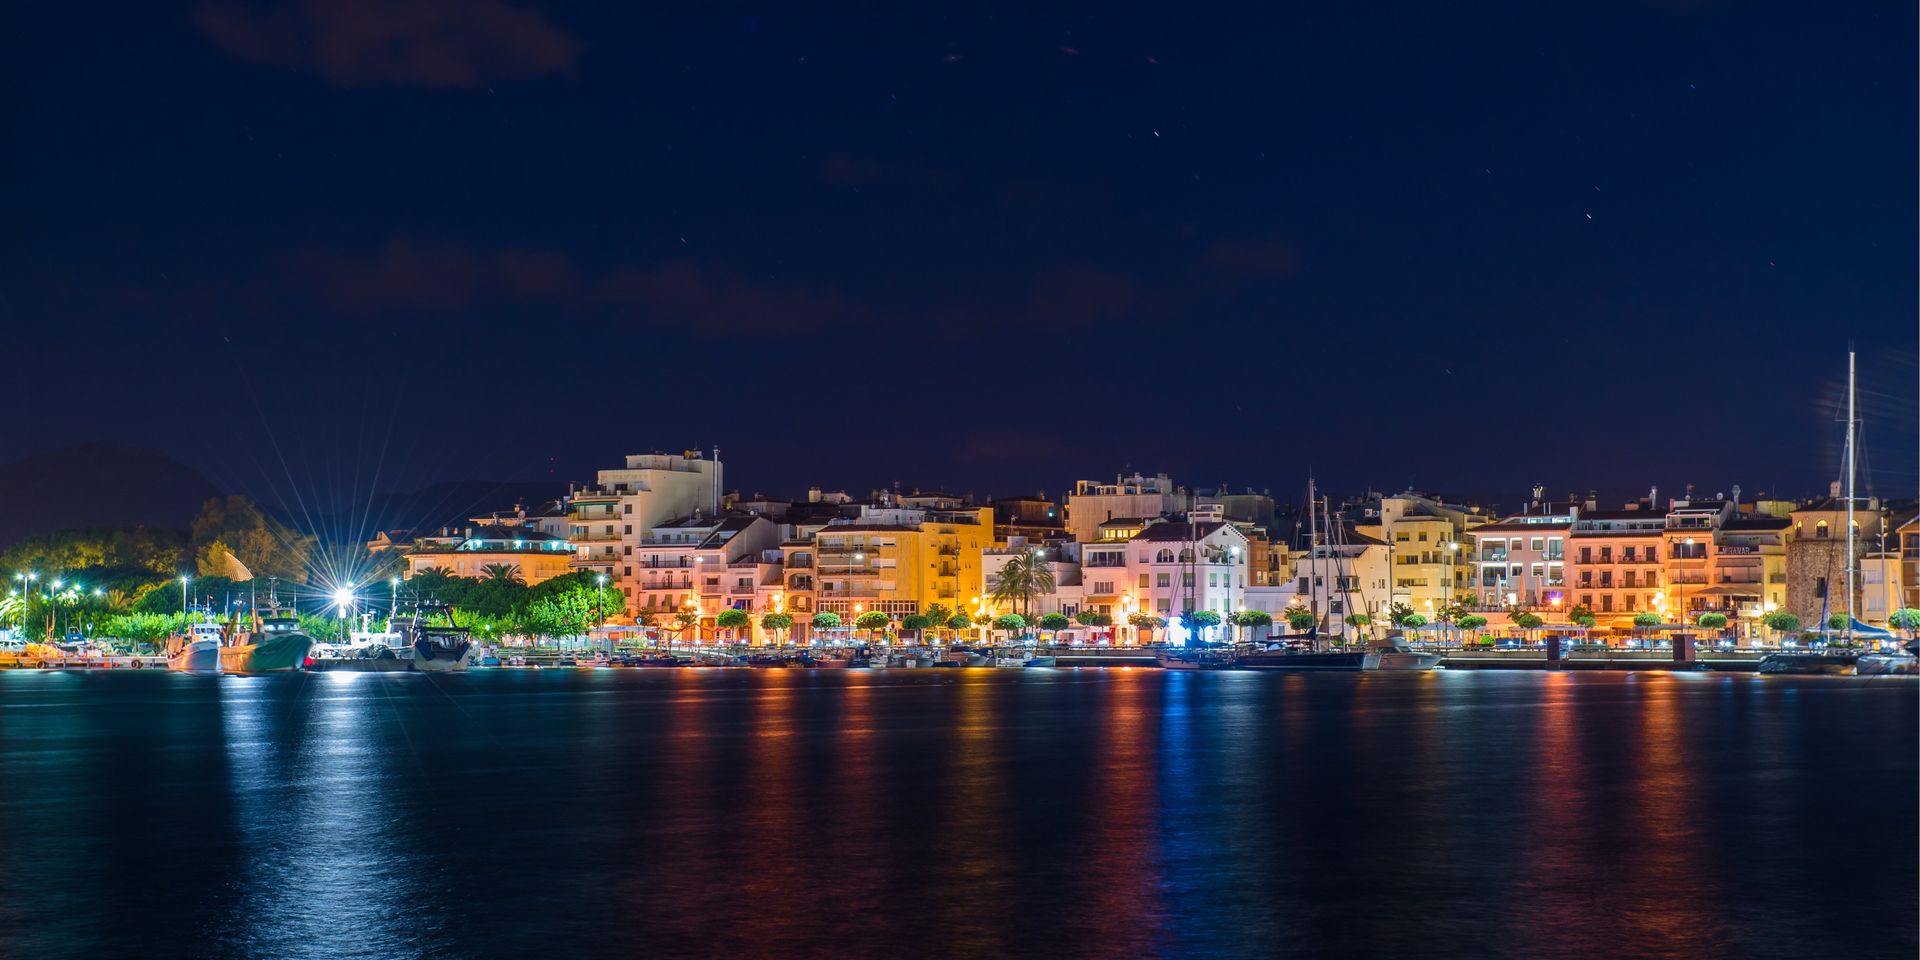 Cambrils and its harbour lit up against the night's sky